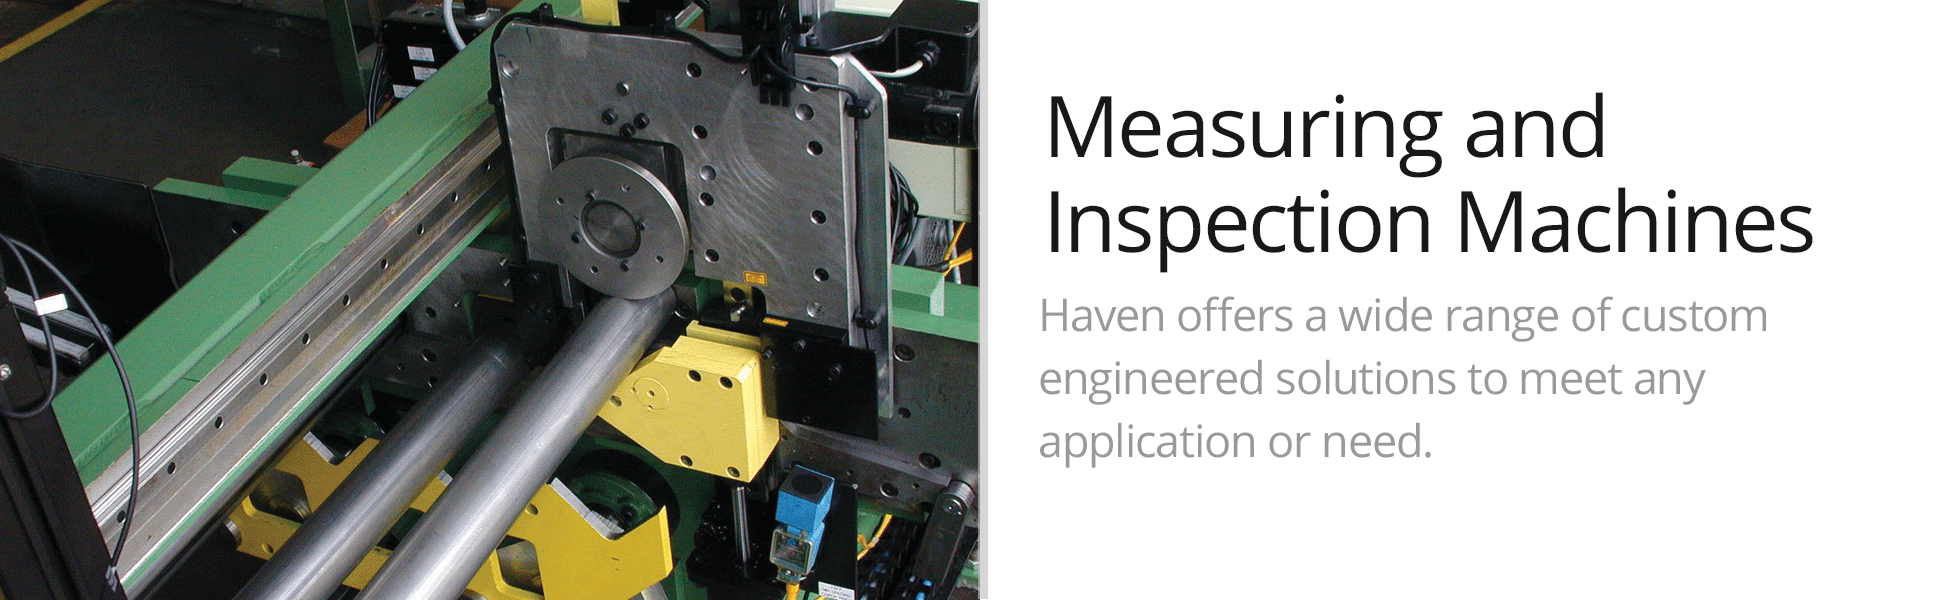 Measuring and Inspection Machines